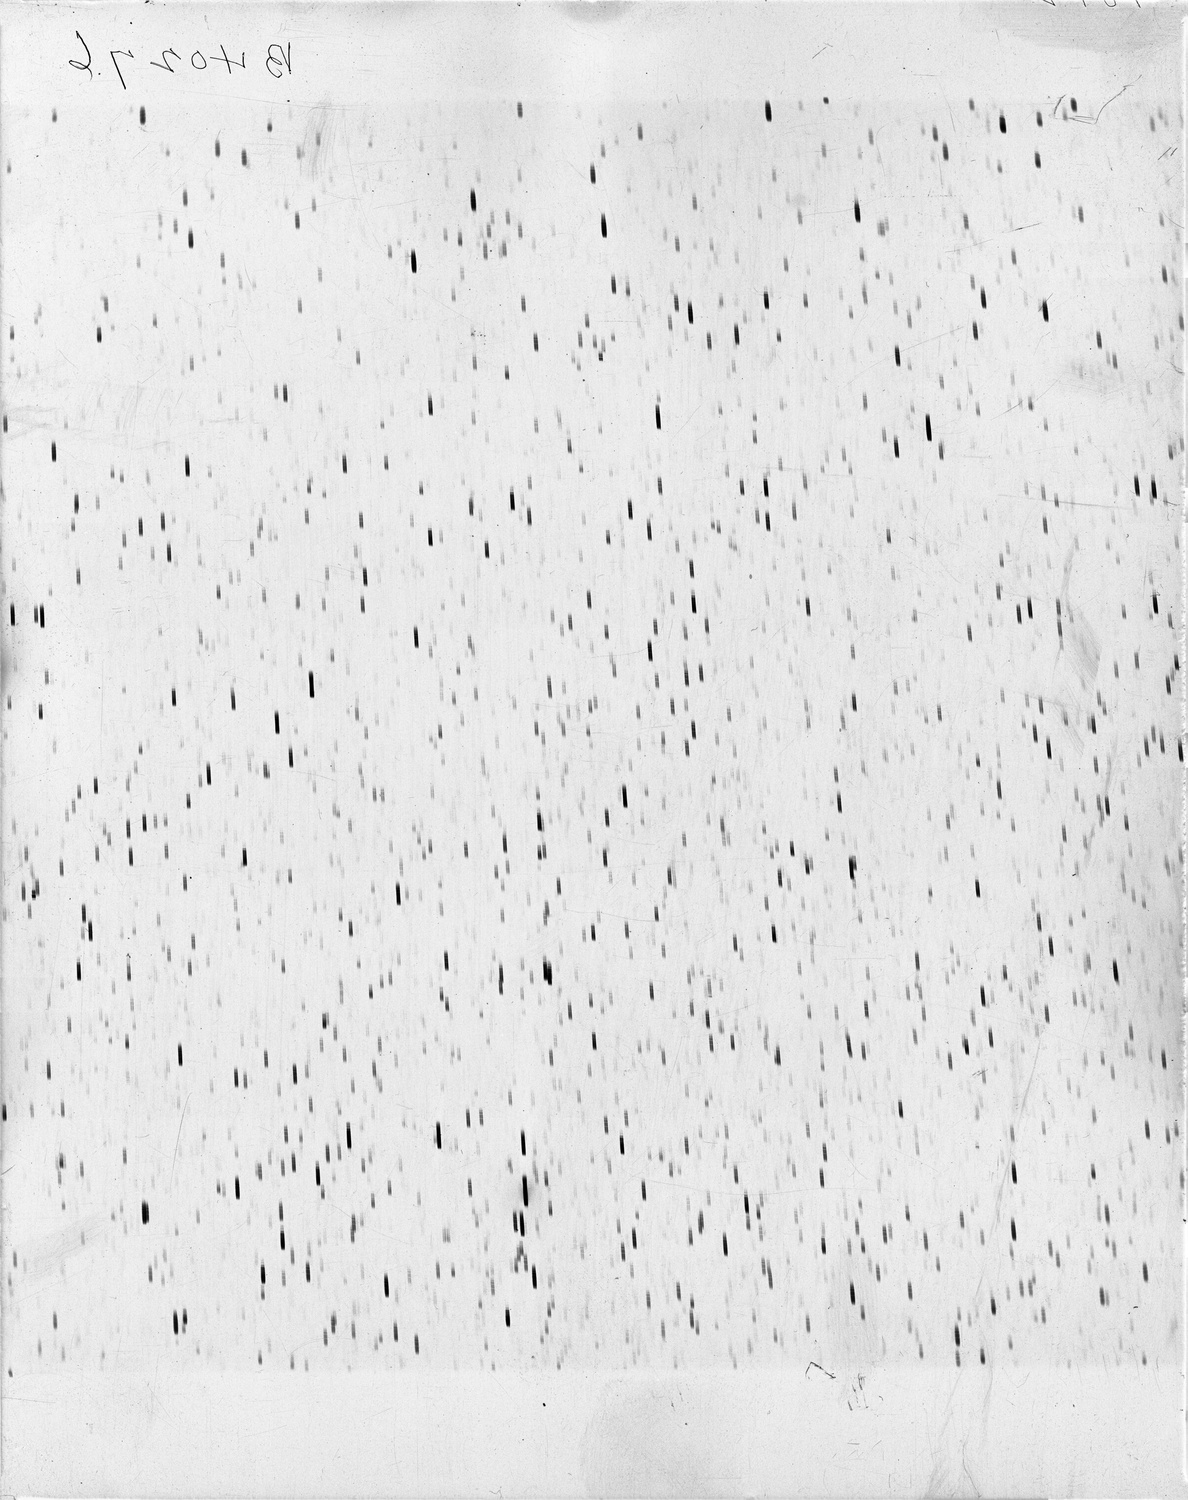 An astronomical photographic plate taken in Peru from Harvard College Observatory's Arequipa Station.